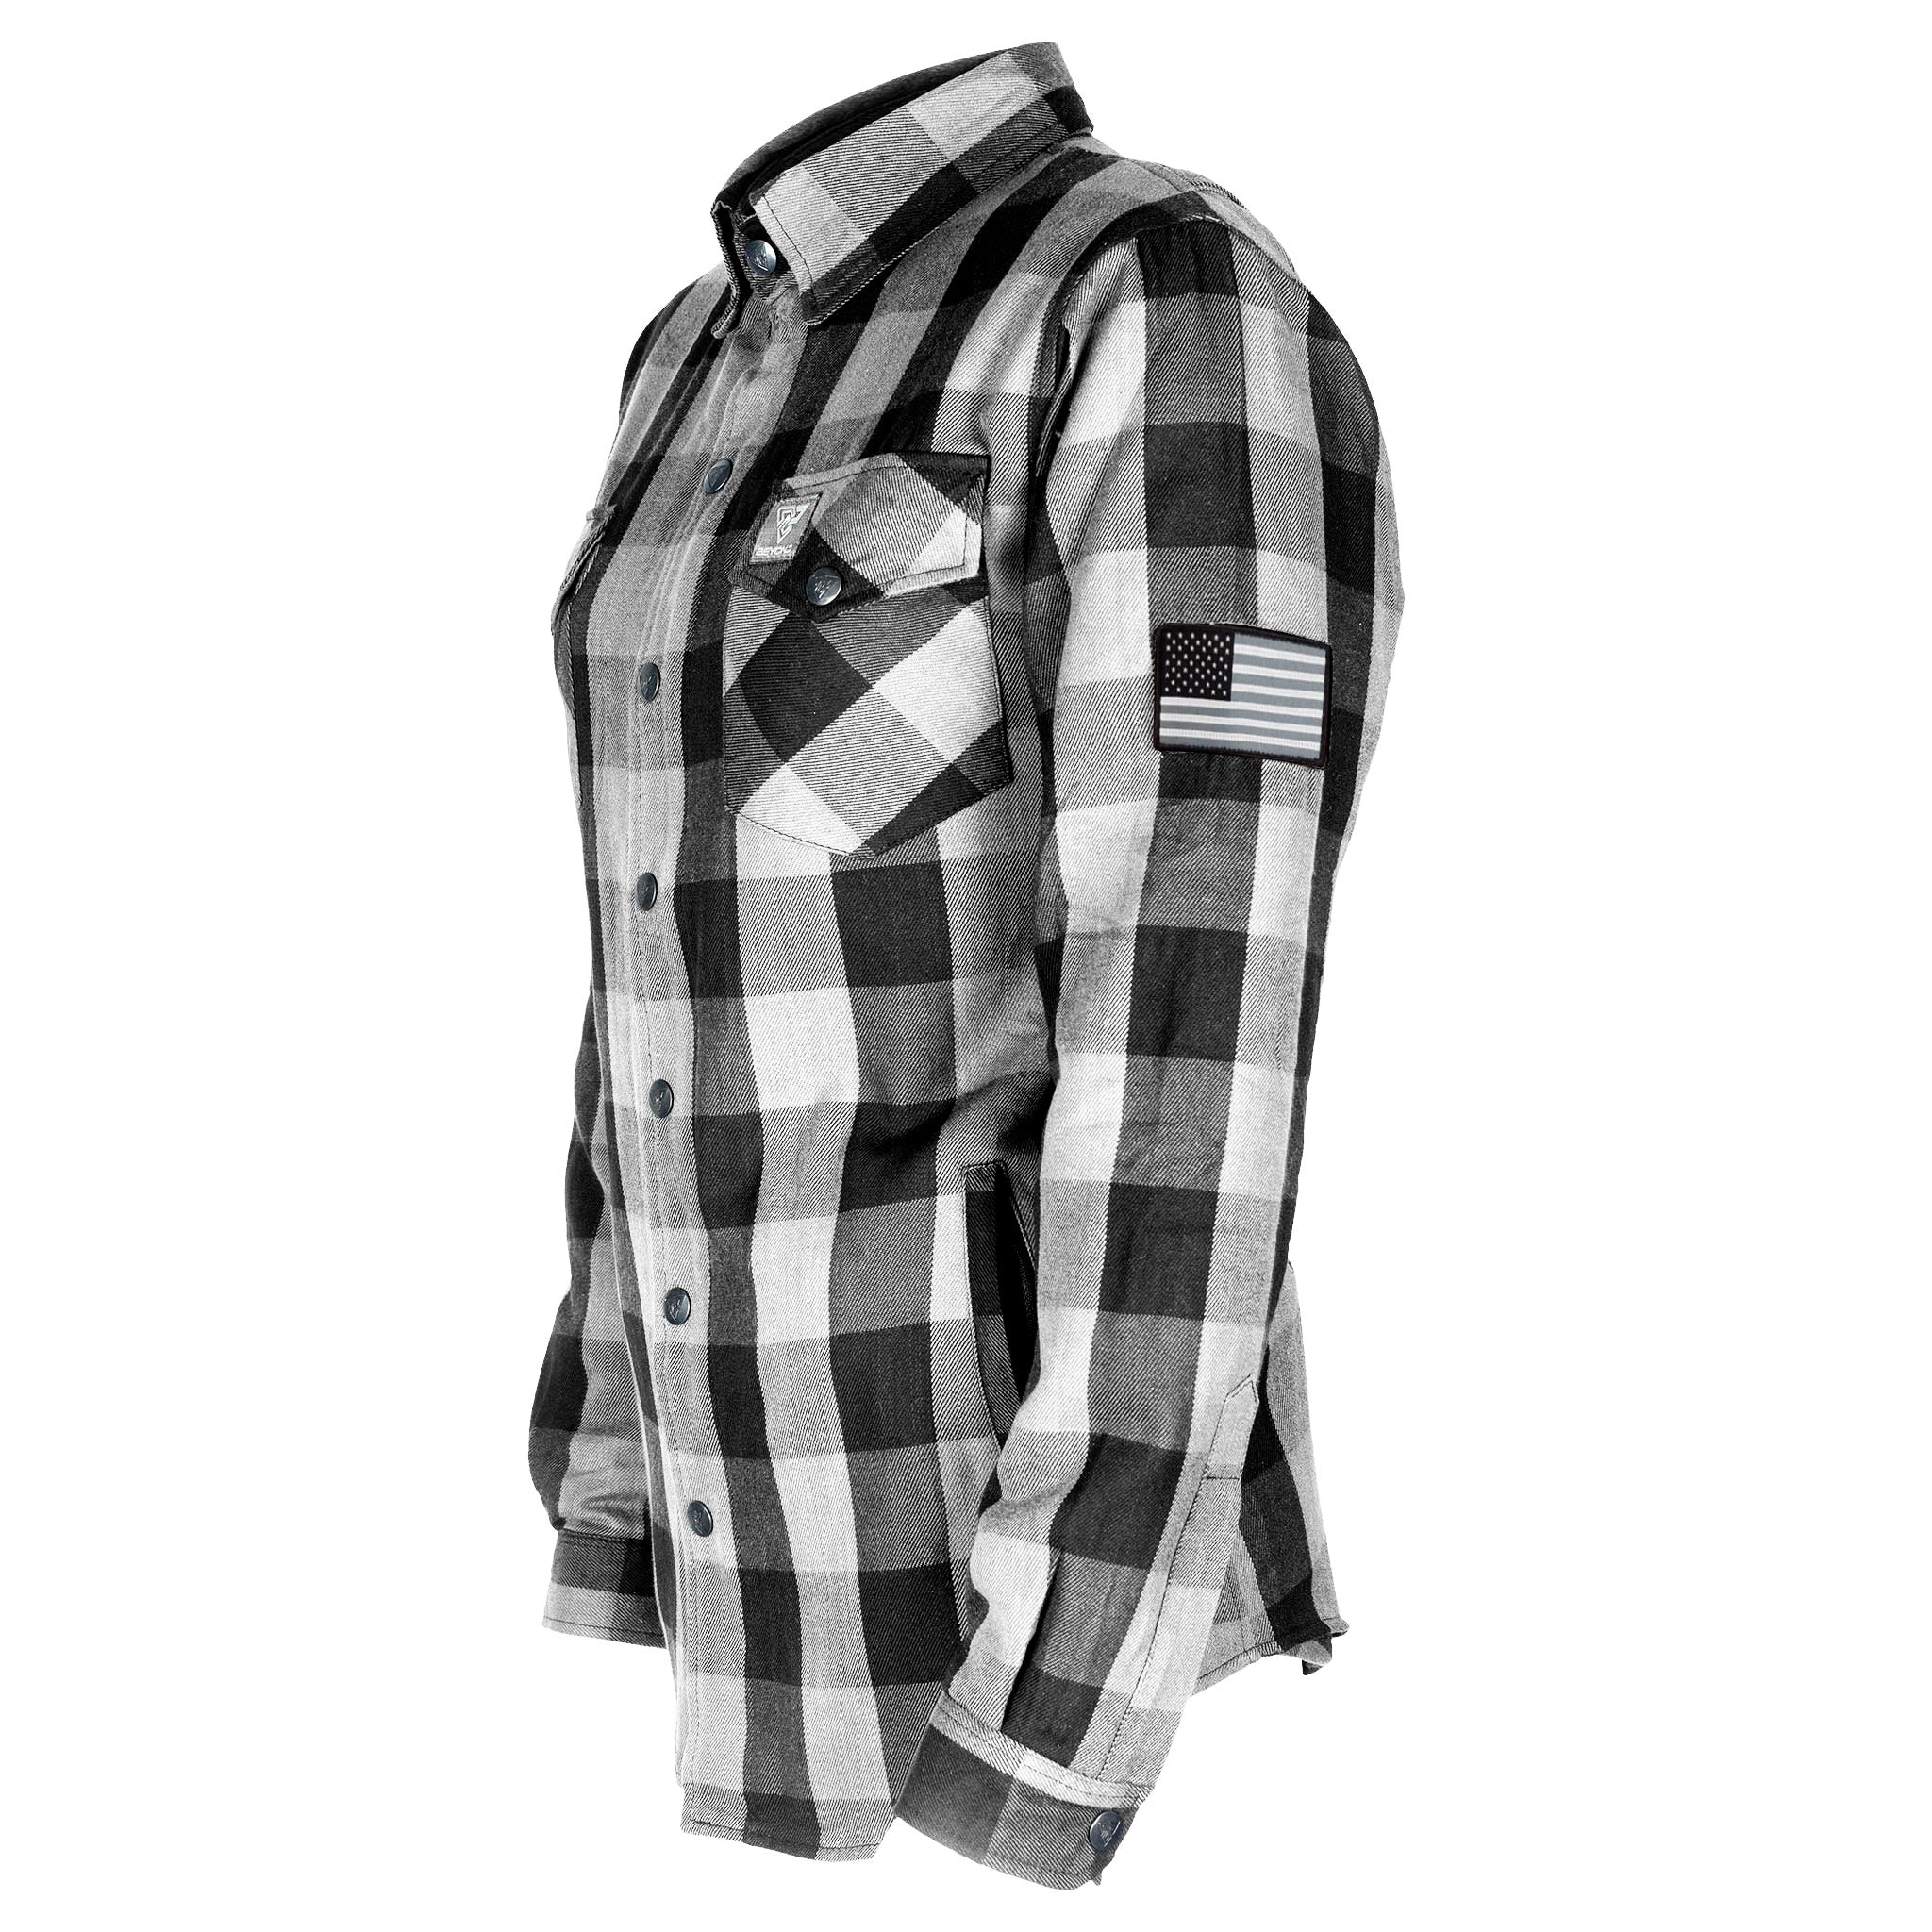 Protective Flannel Shirt for Women - White and Black Checkered with Pads